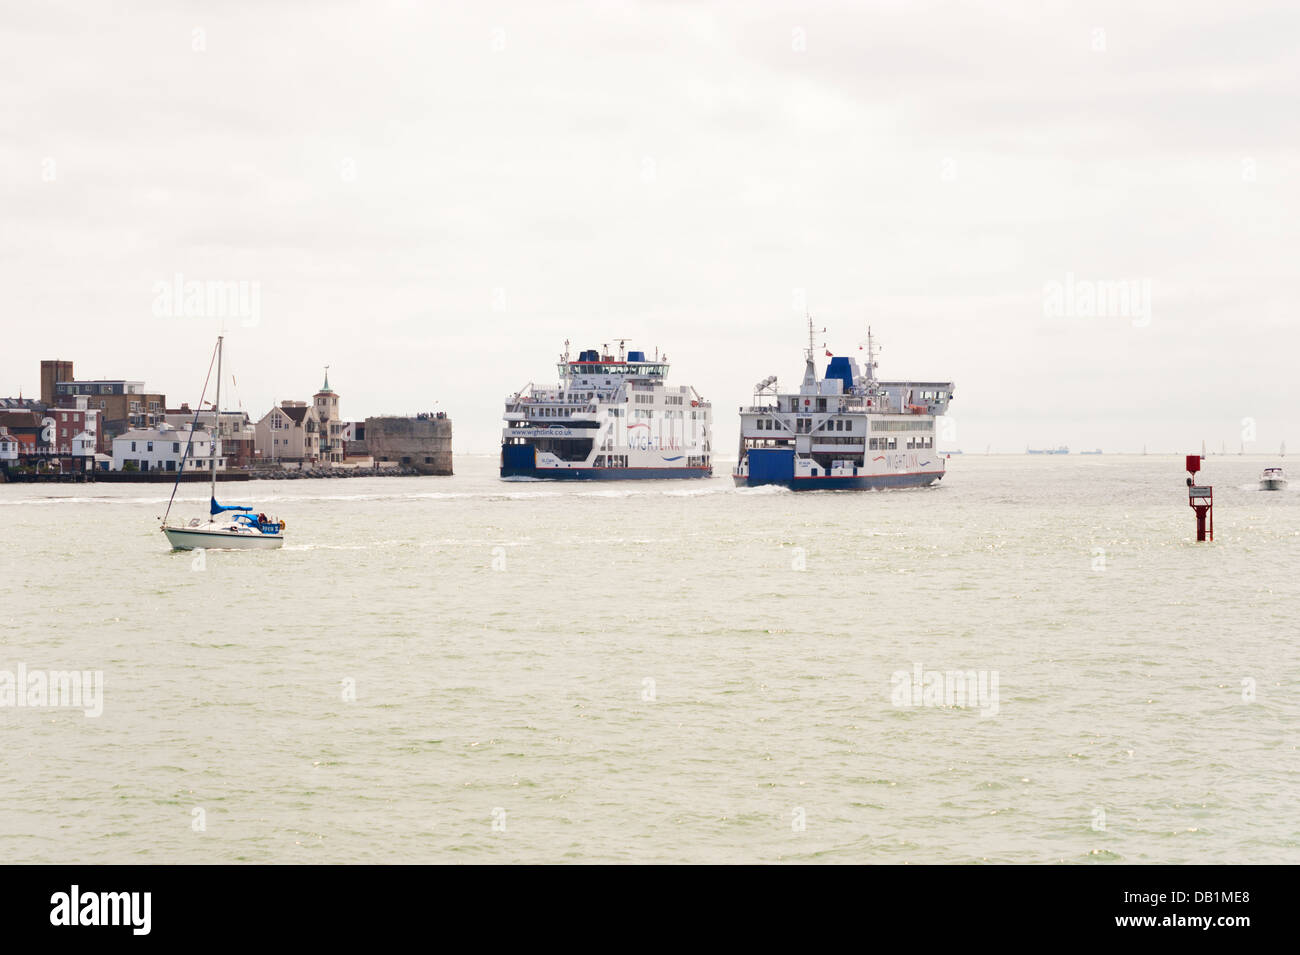 Two Isle of Wight ferries pass in Portsmouth Harbour, UK. Stock Photo